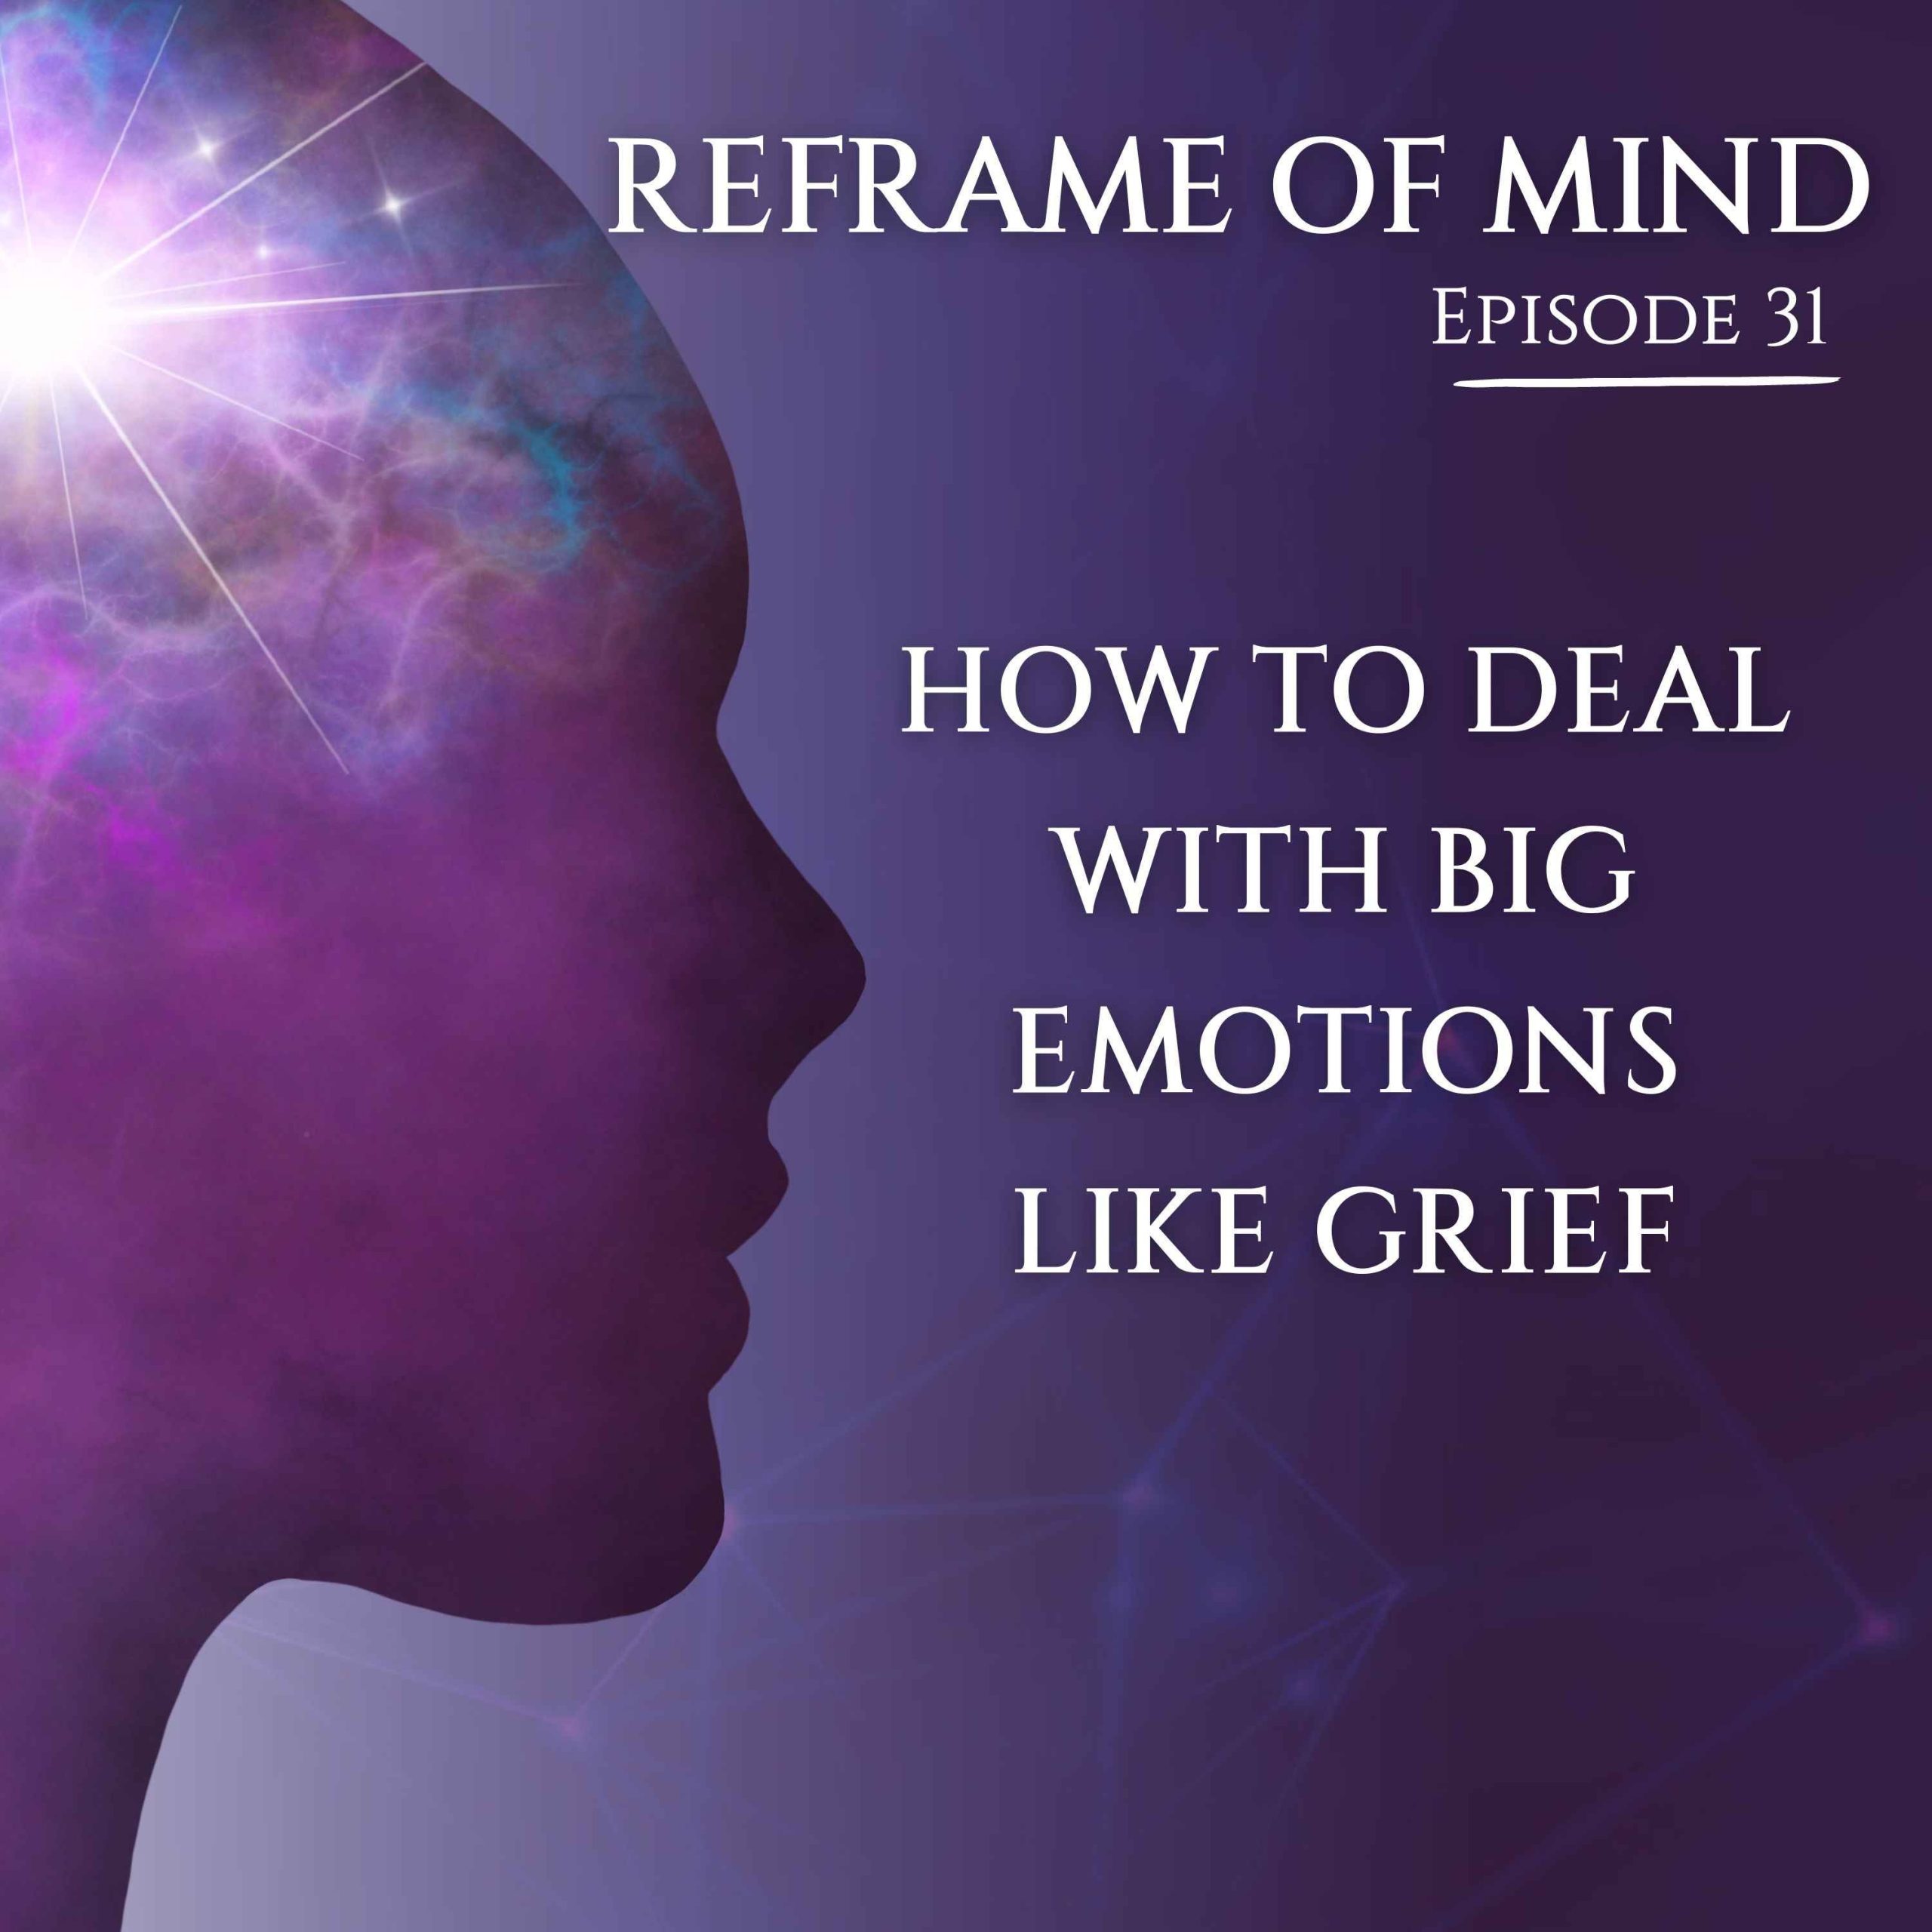 How to deal with BIG emotions like grief